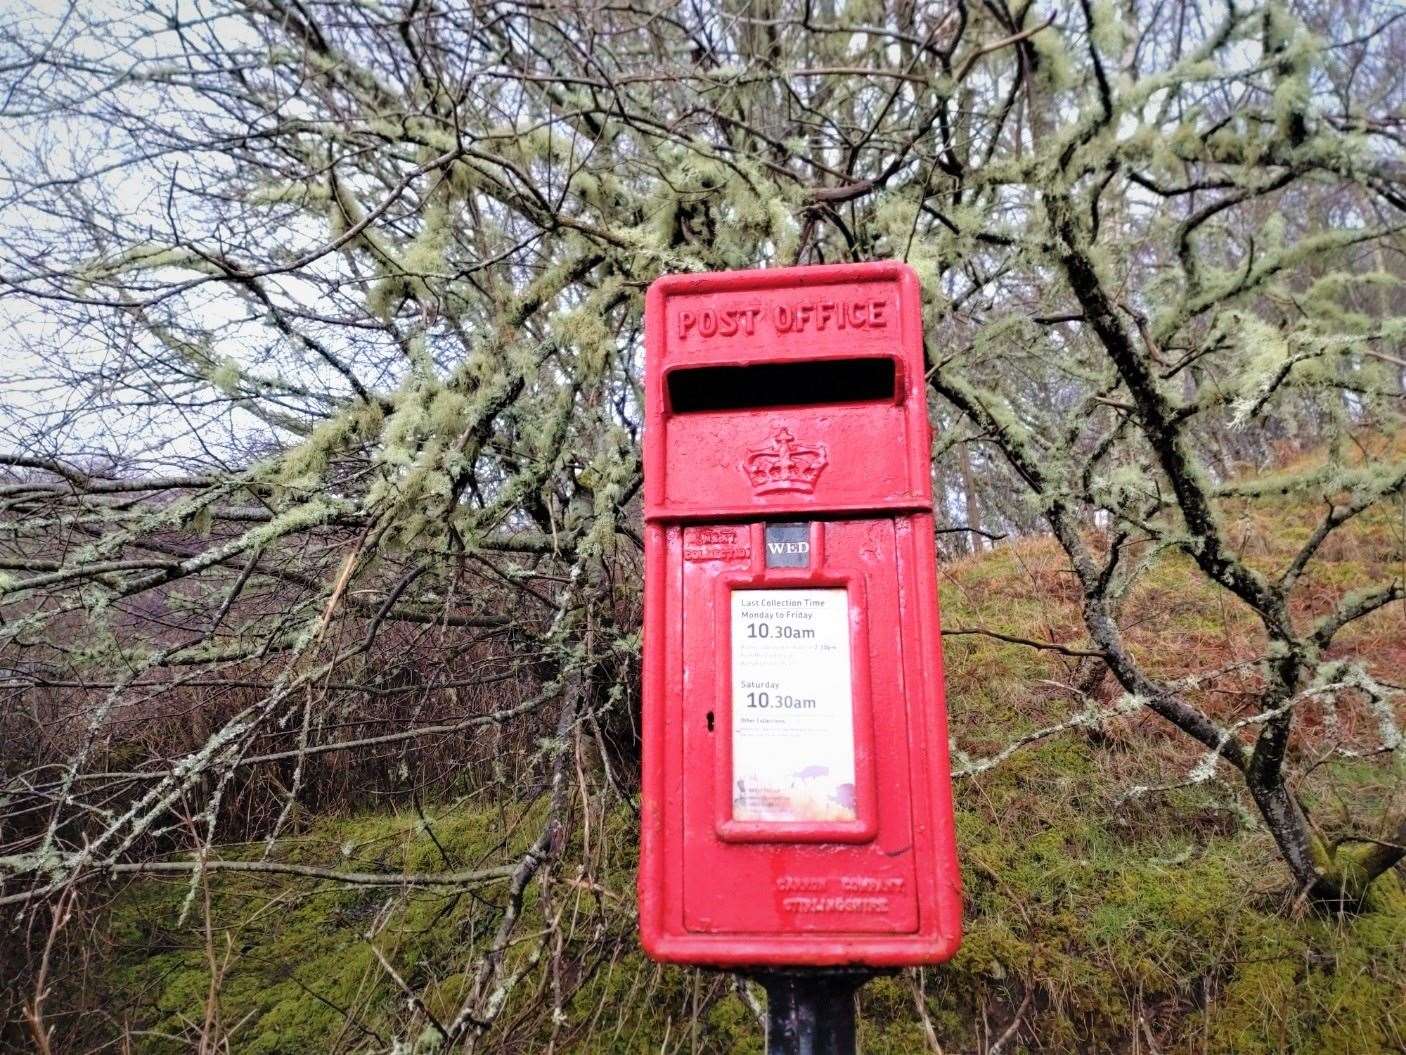 After eye surgery, lichen on the trees is now one of postman Mark Gilbert’s favourite sights.